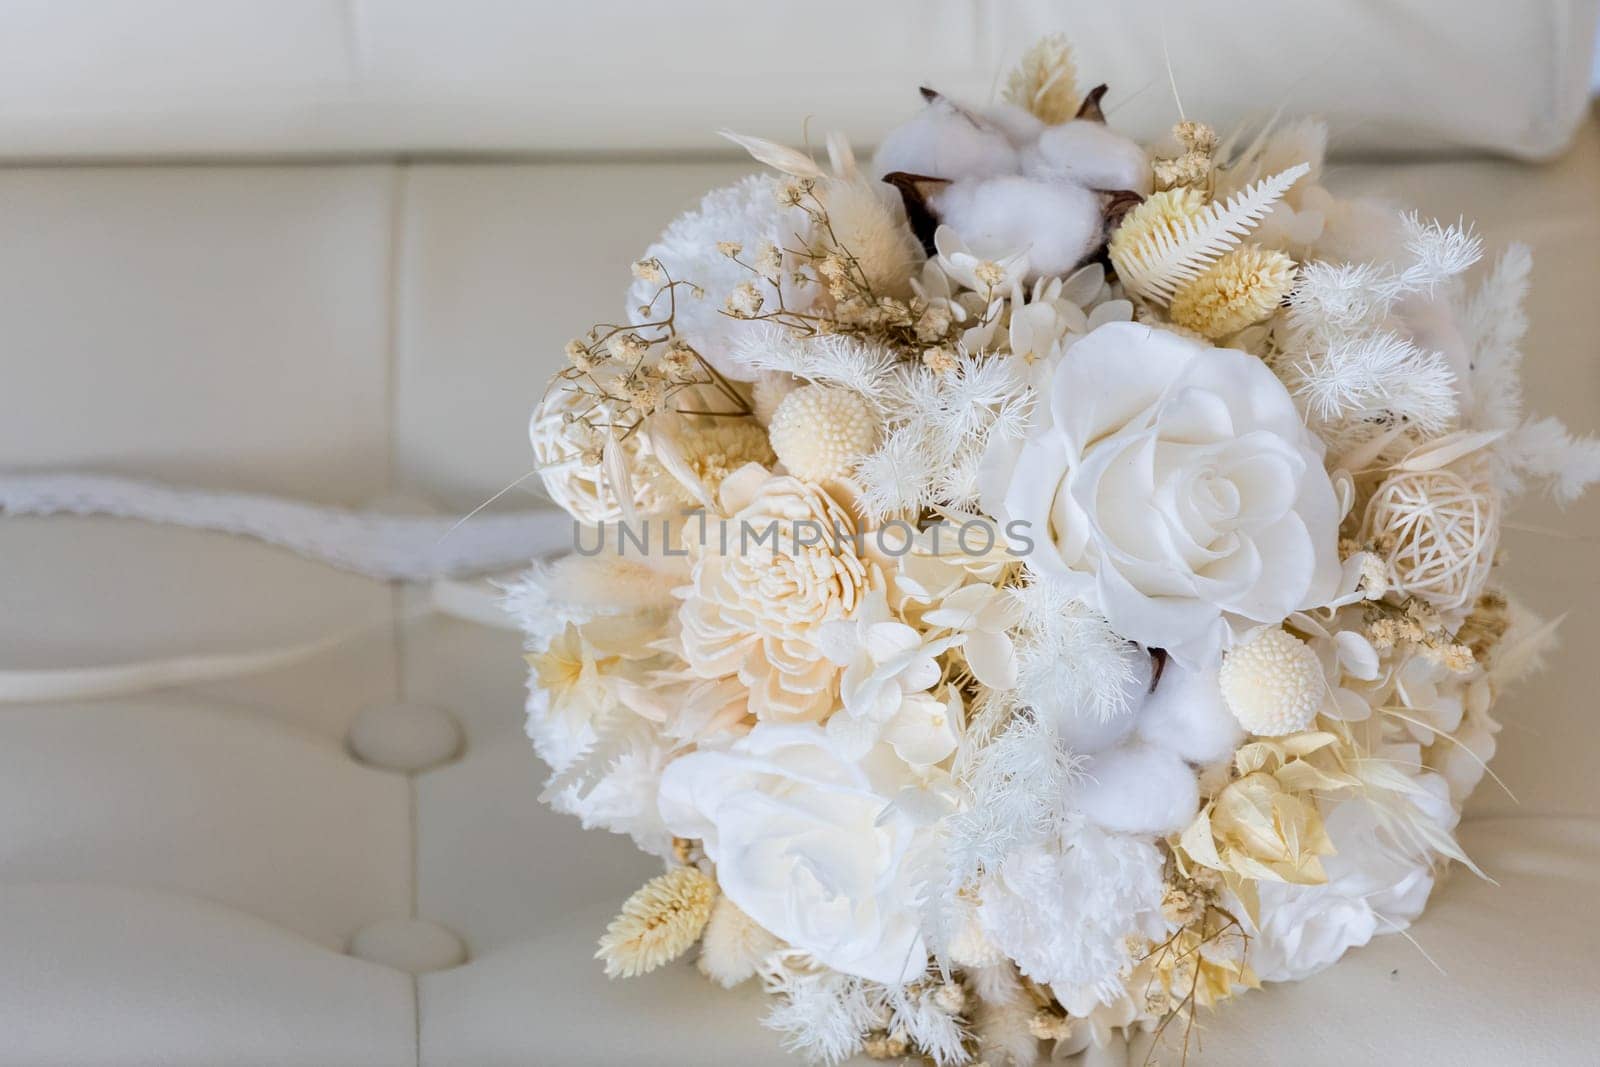 A tender bouquet of the bride in pastel colors on a leather sofa by Serhii_Voroshchuk